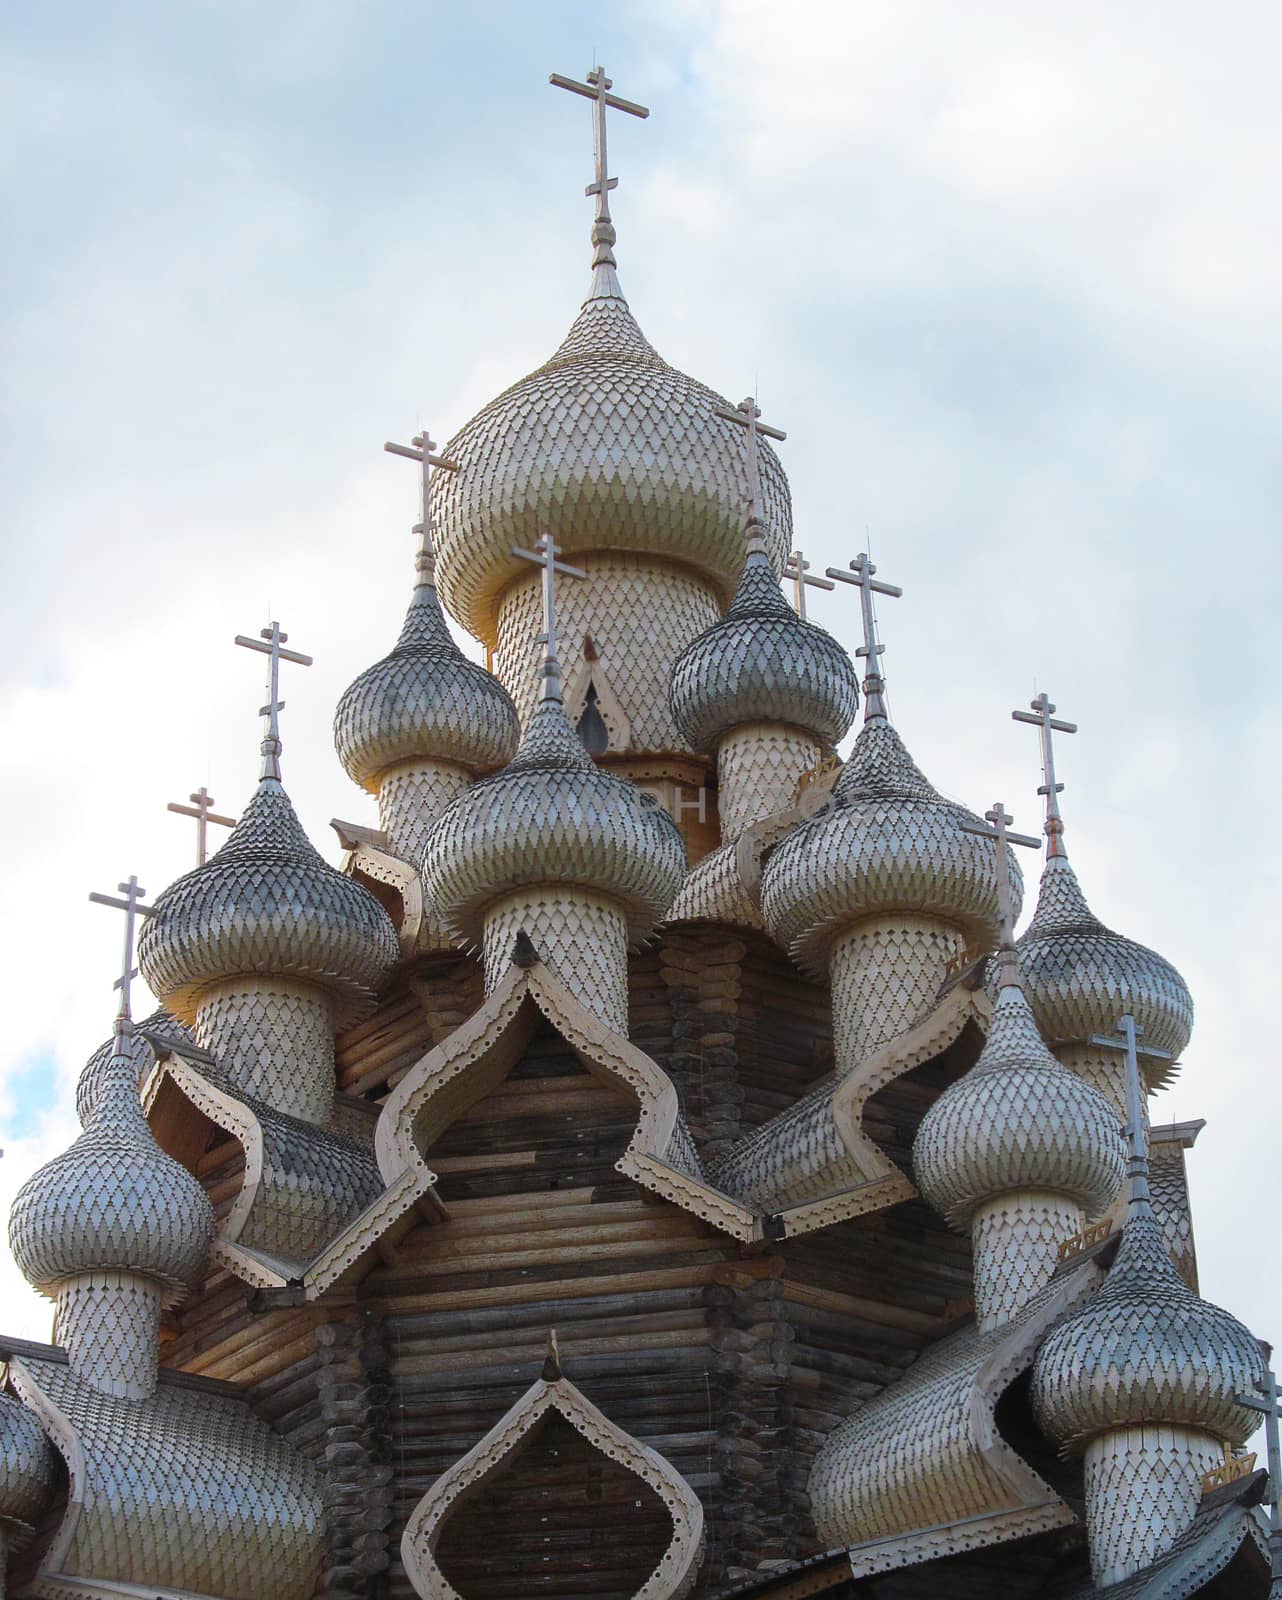 
Dome of the Orthodox Church close-up against the sky.
 by Igor2006